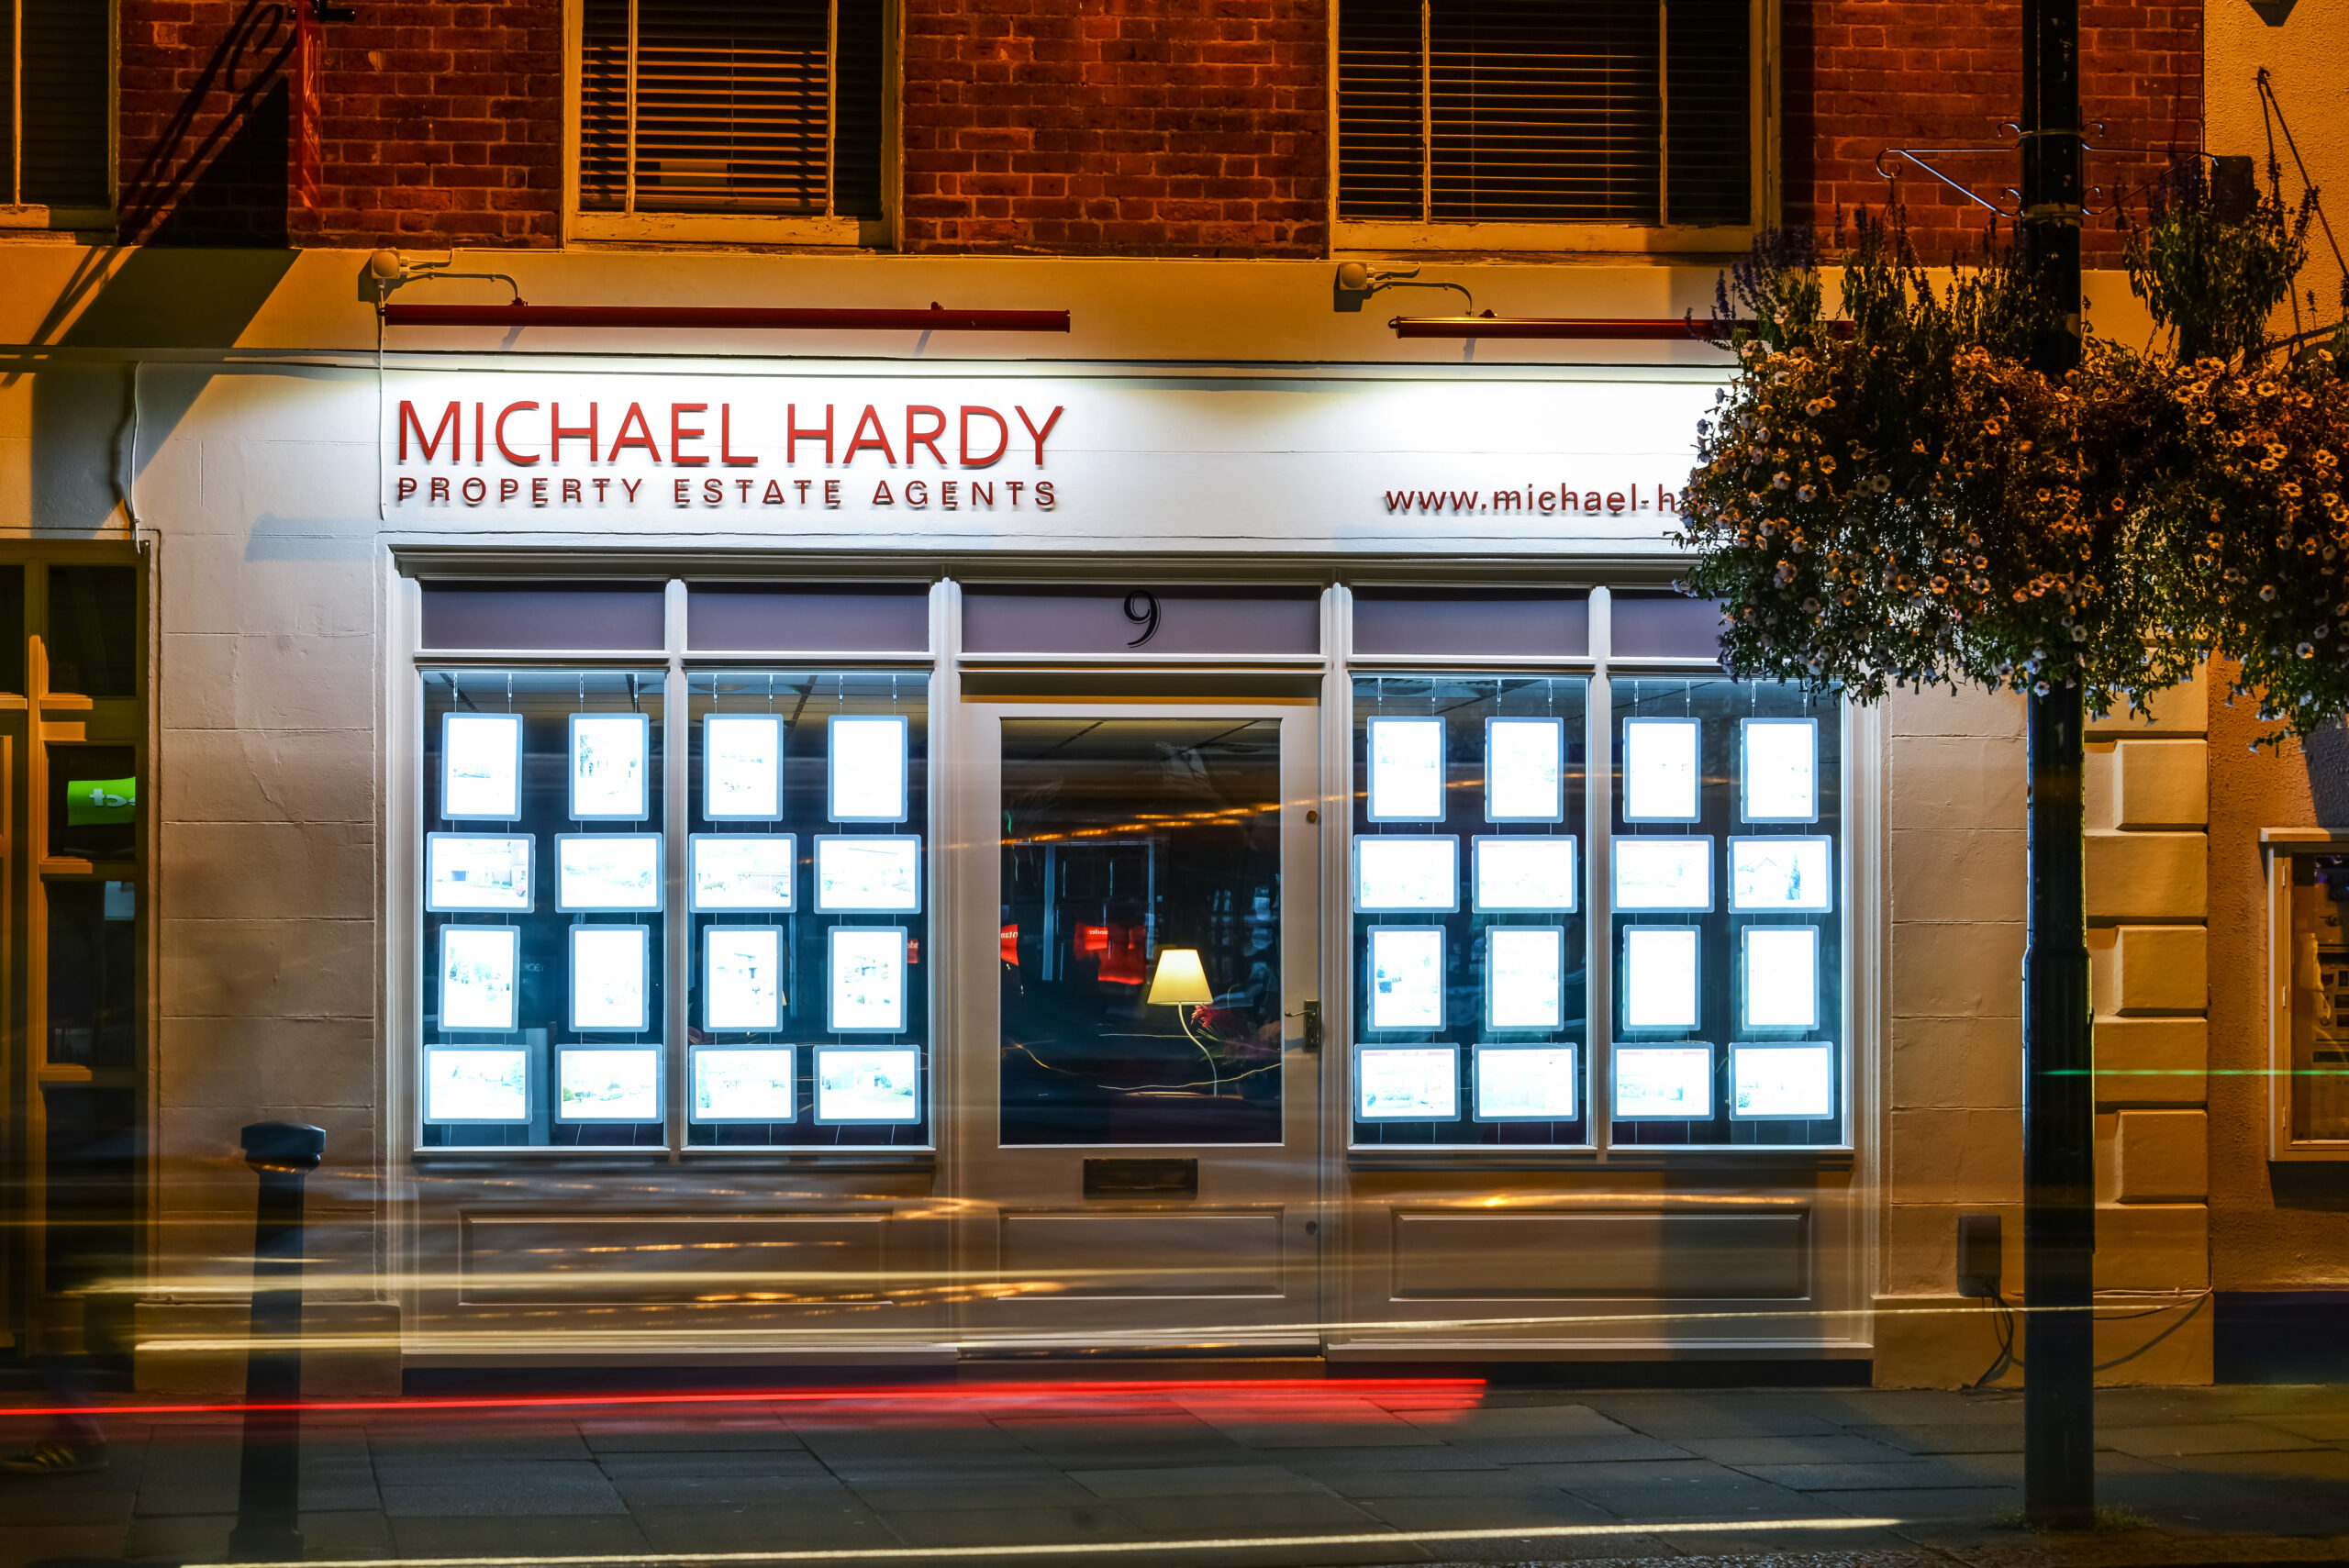 Michael Hardy Exterior at Night